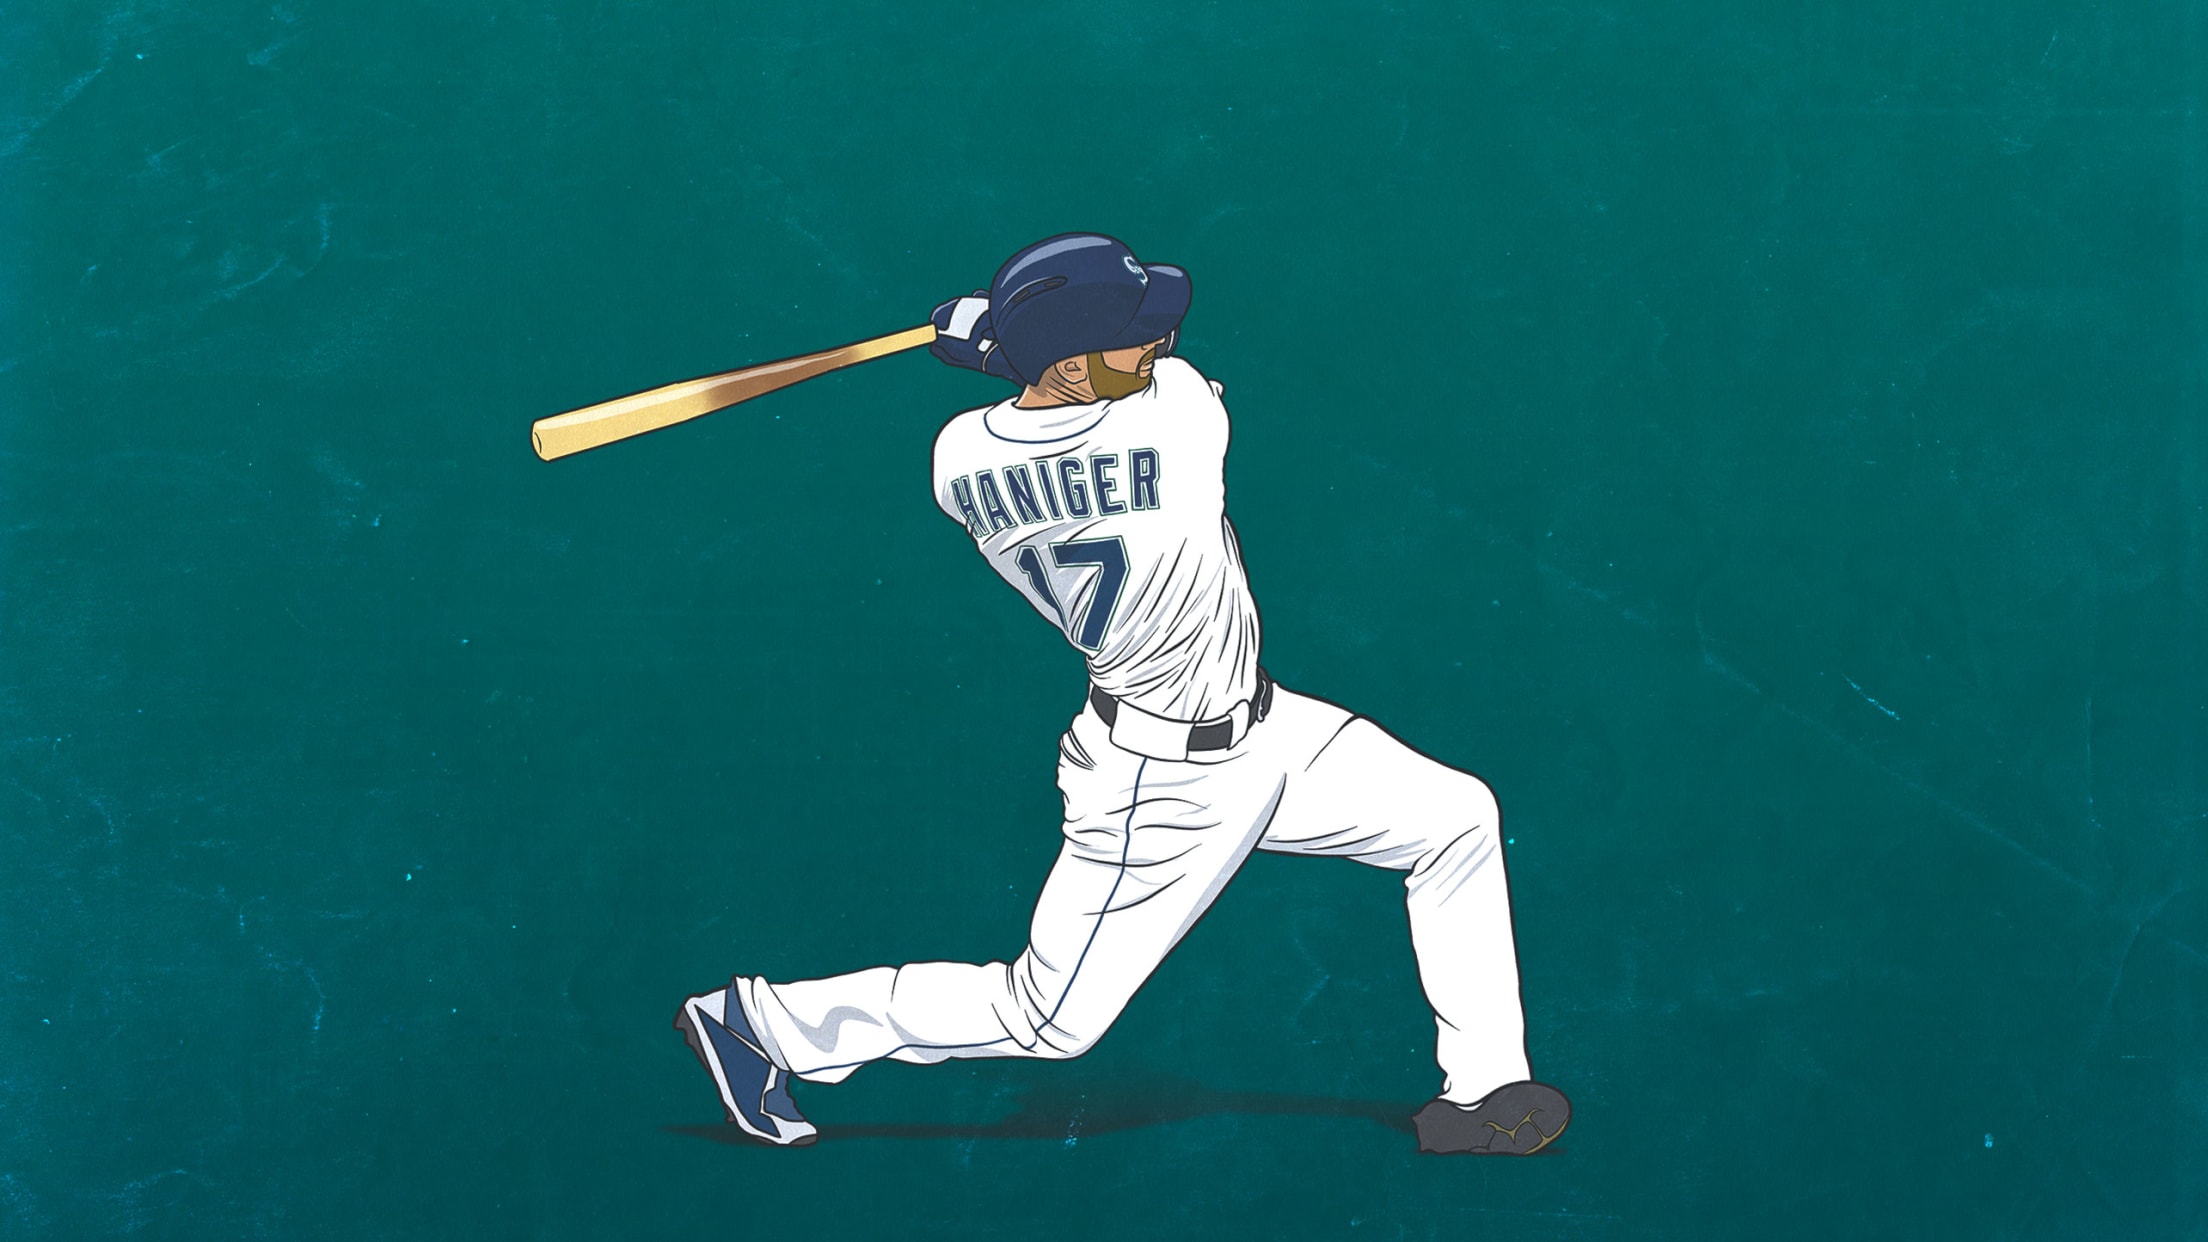 Mariners Players Wallpapers | Seattle Mariners